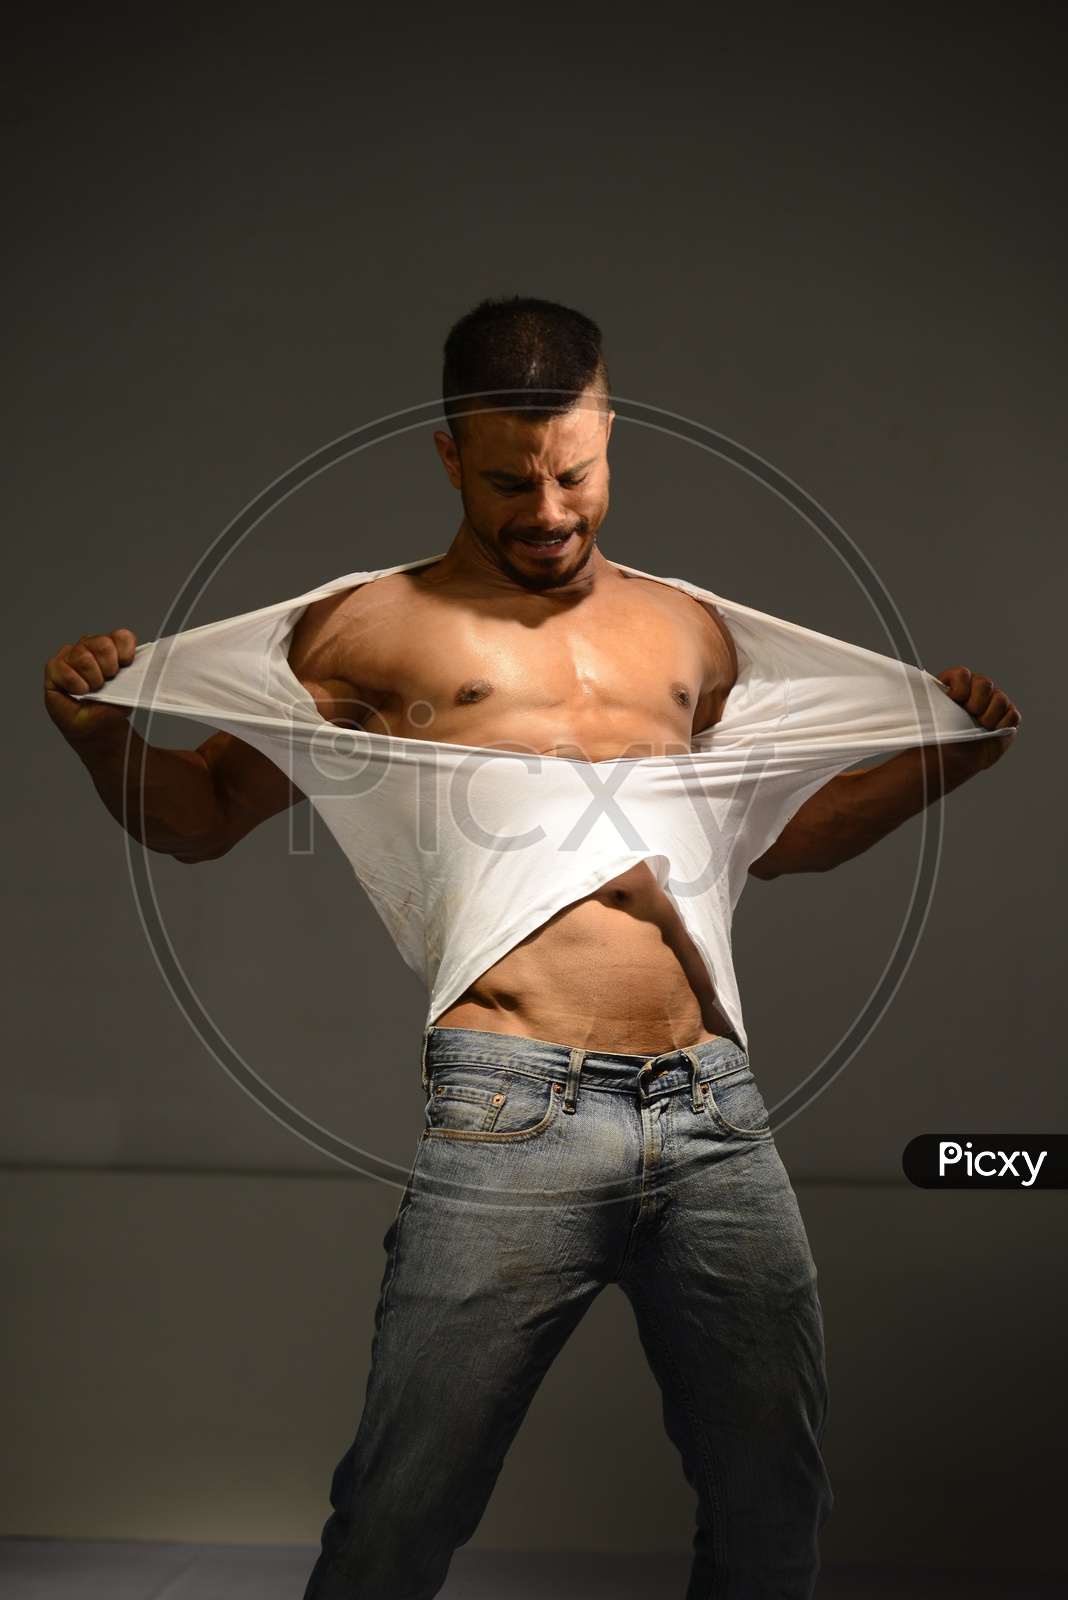 Indian Muscular Man tearing his vest into pieces